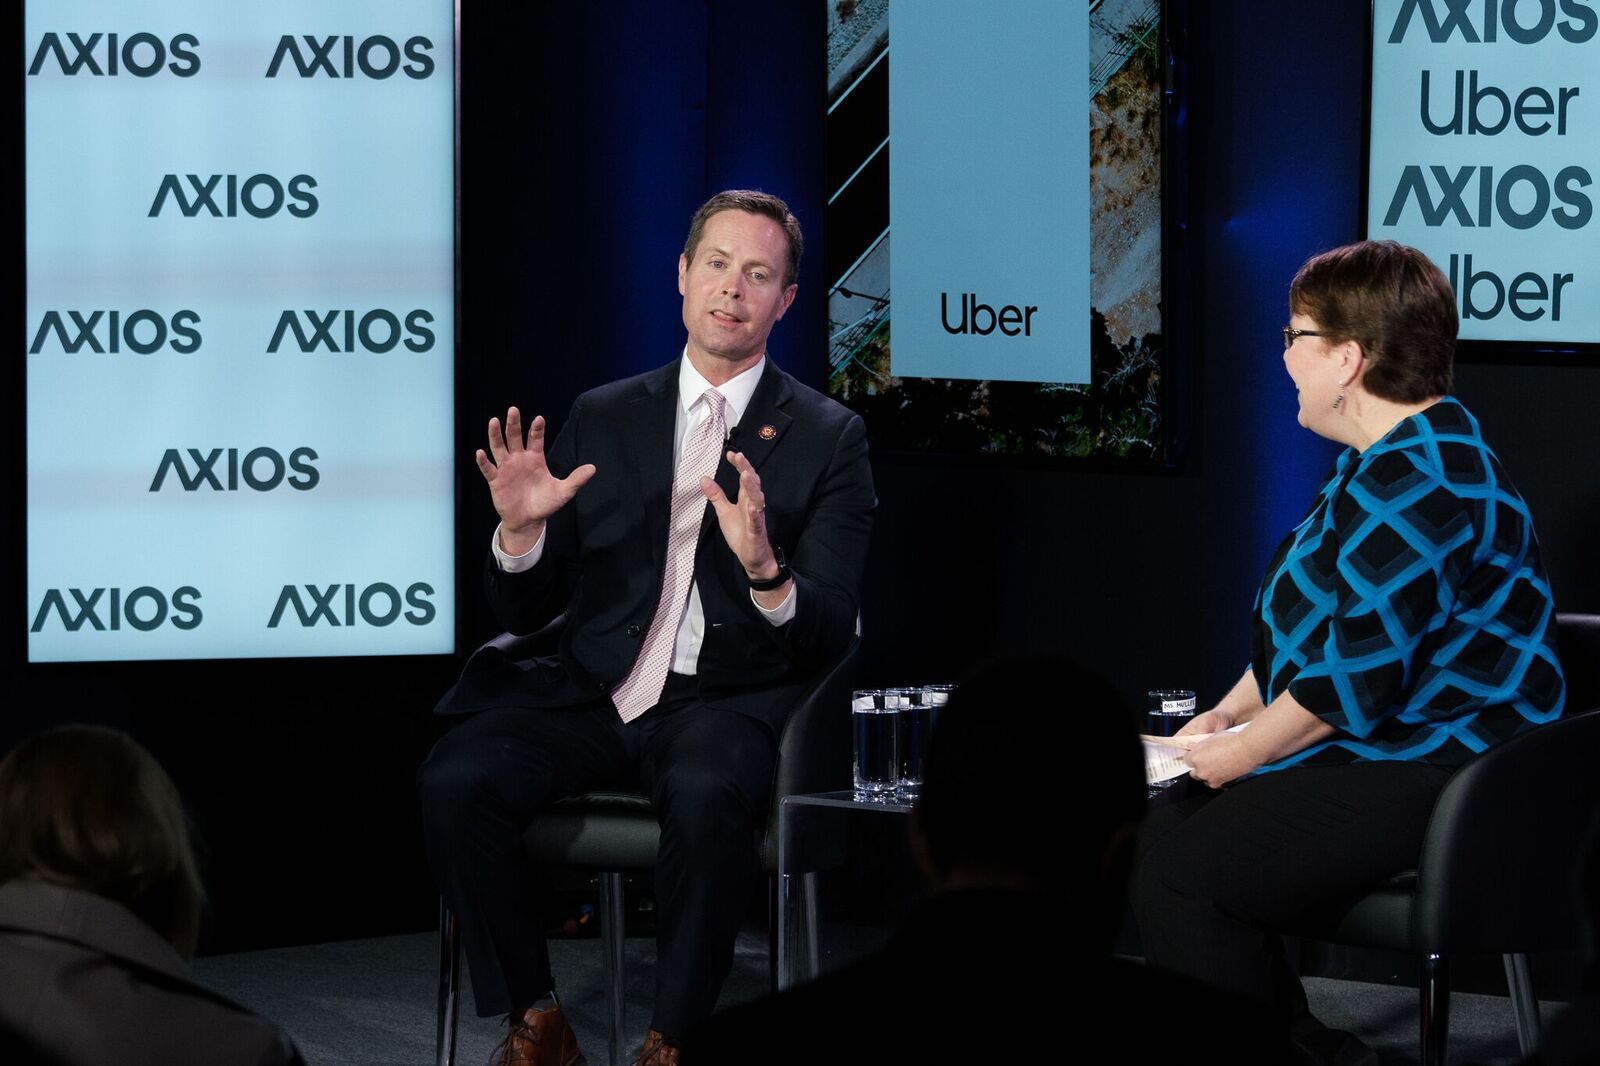 Rep. Rodney Davis on the Axios stage